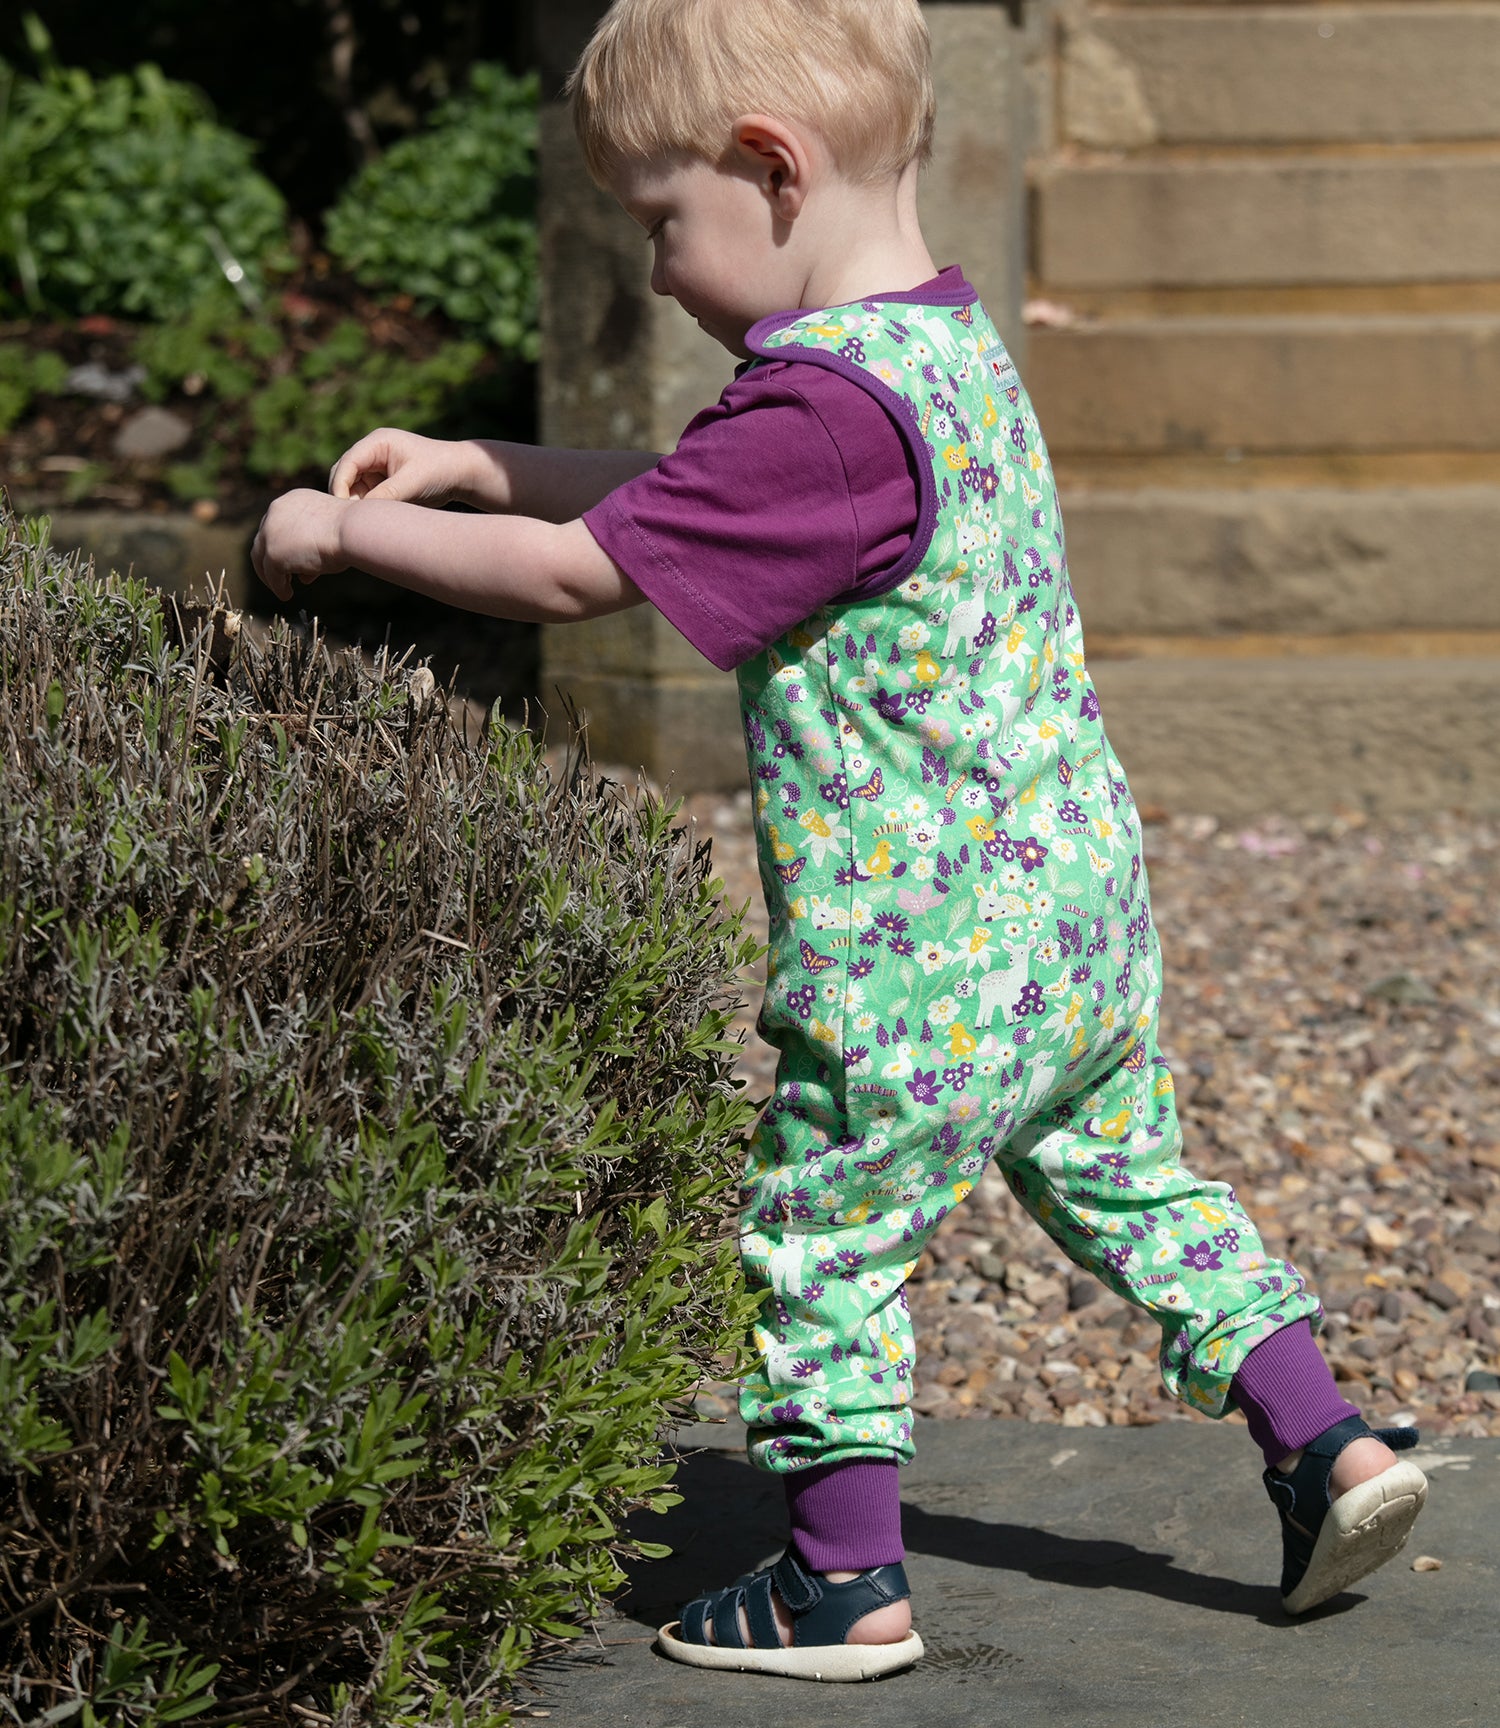 Piccalilly Dungarees - Spring Meadow